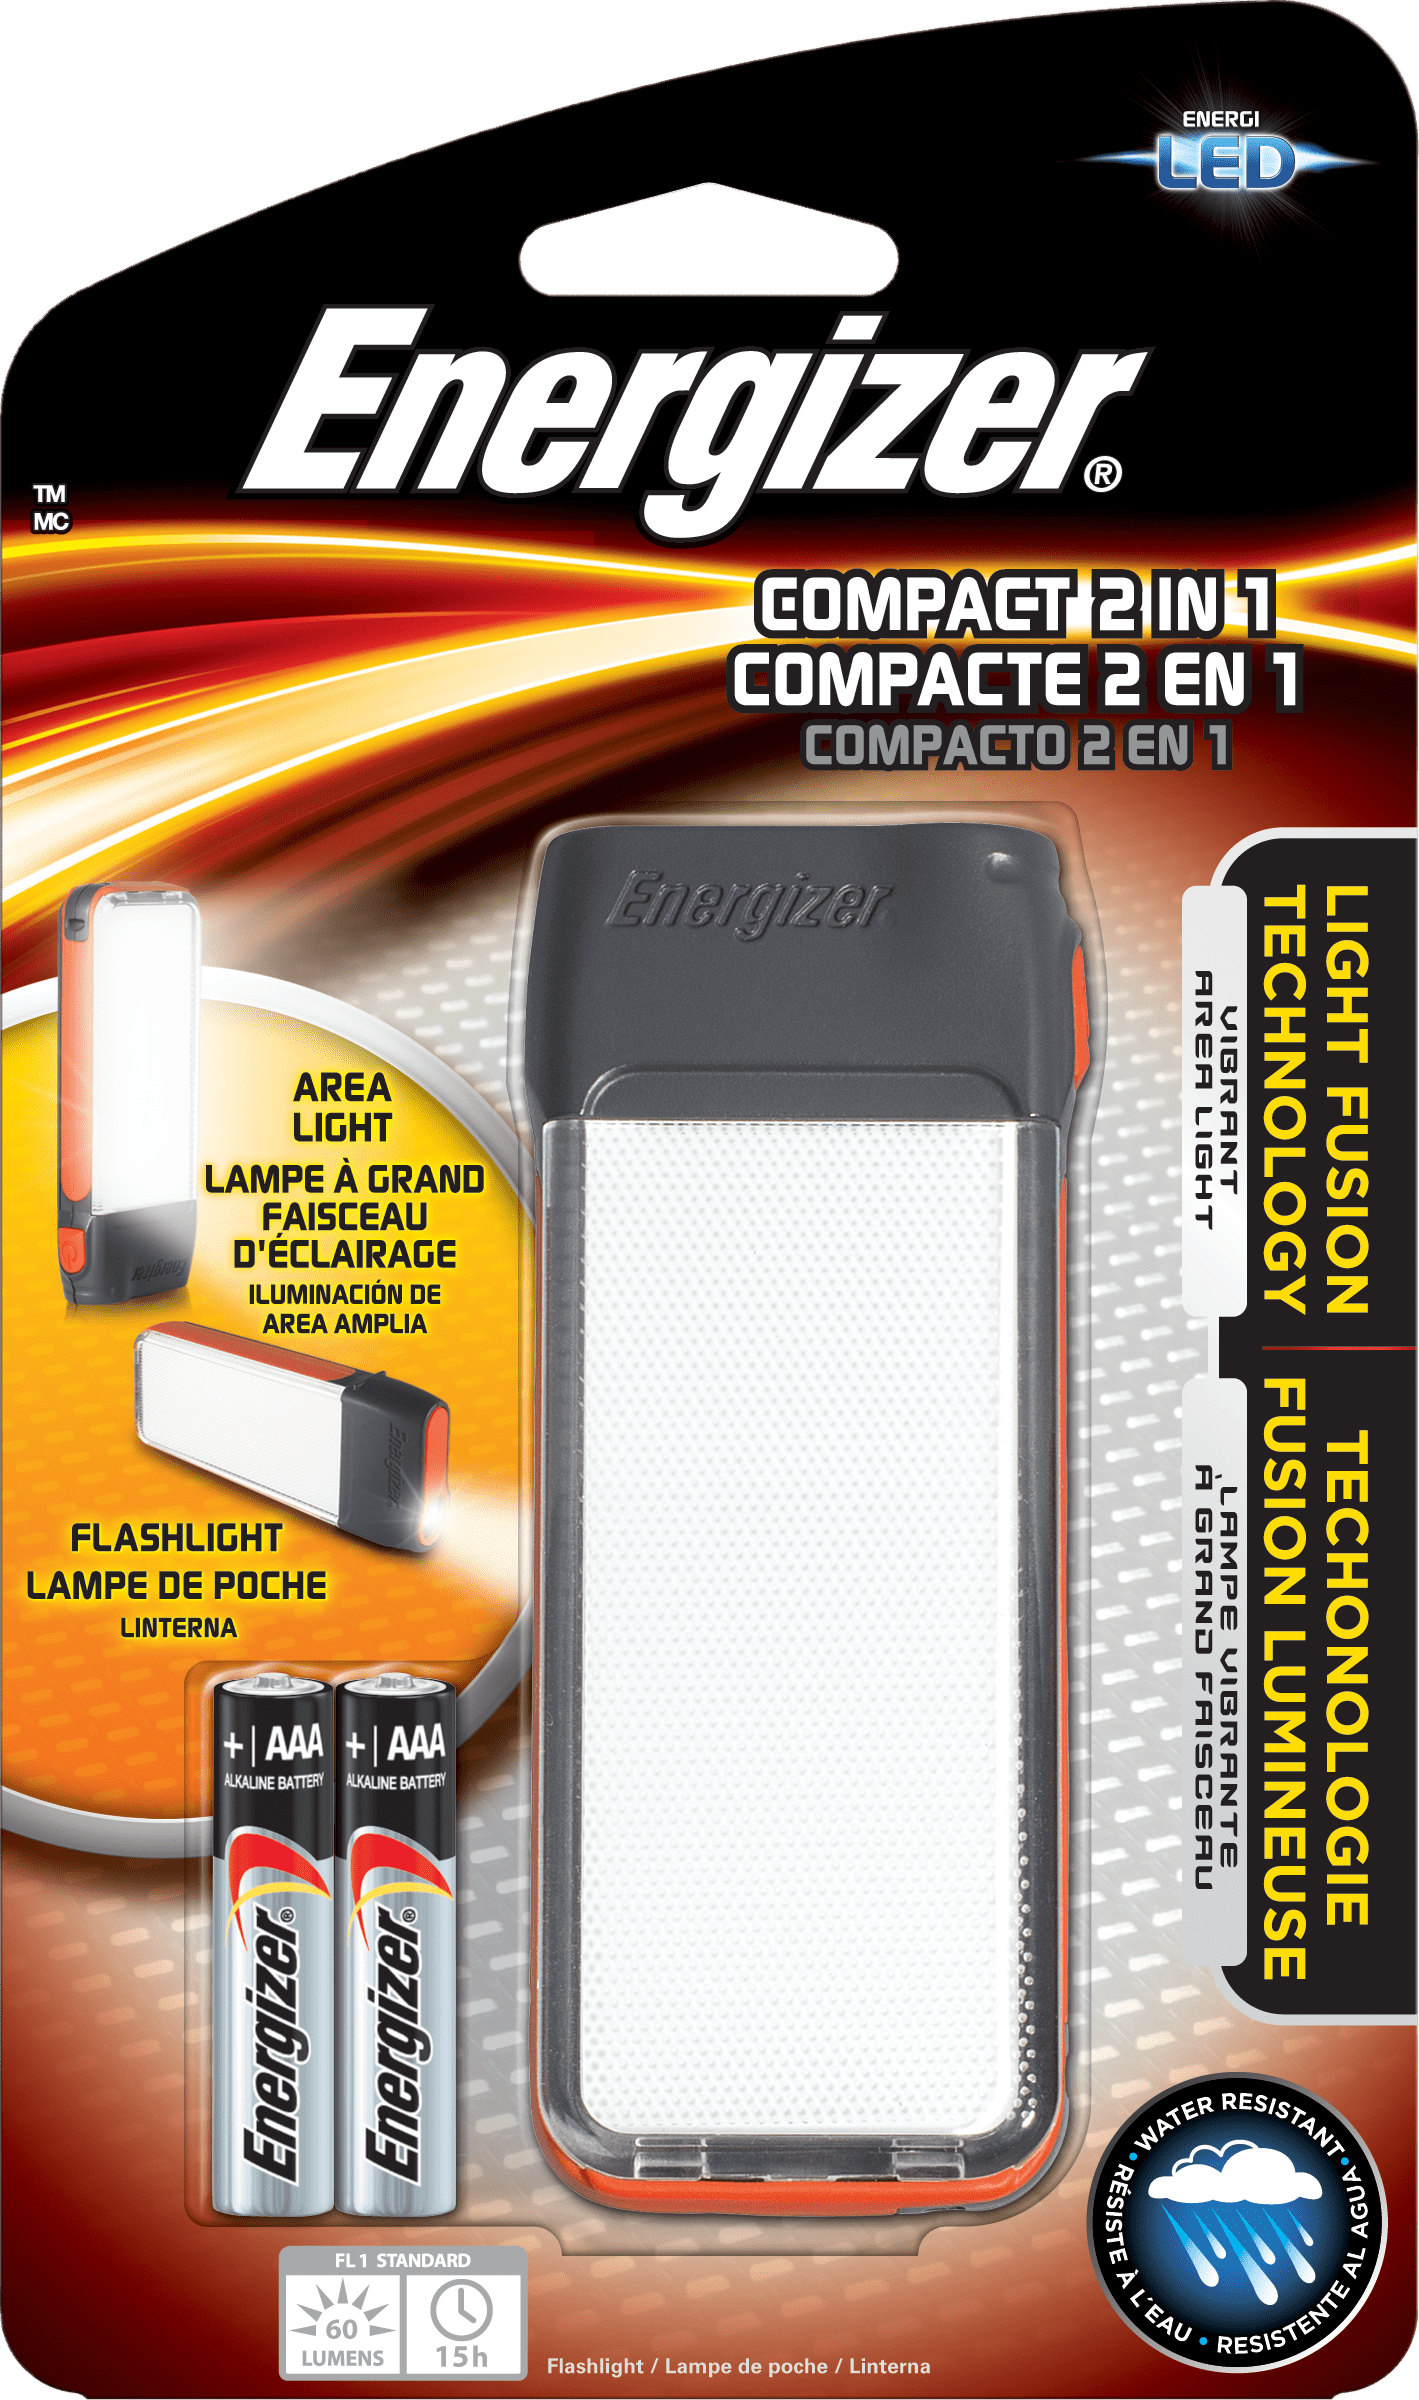 NEW 3 PACK Energizer Fusion Compact LED 2 in 1 Handheld Flash Light 